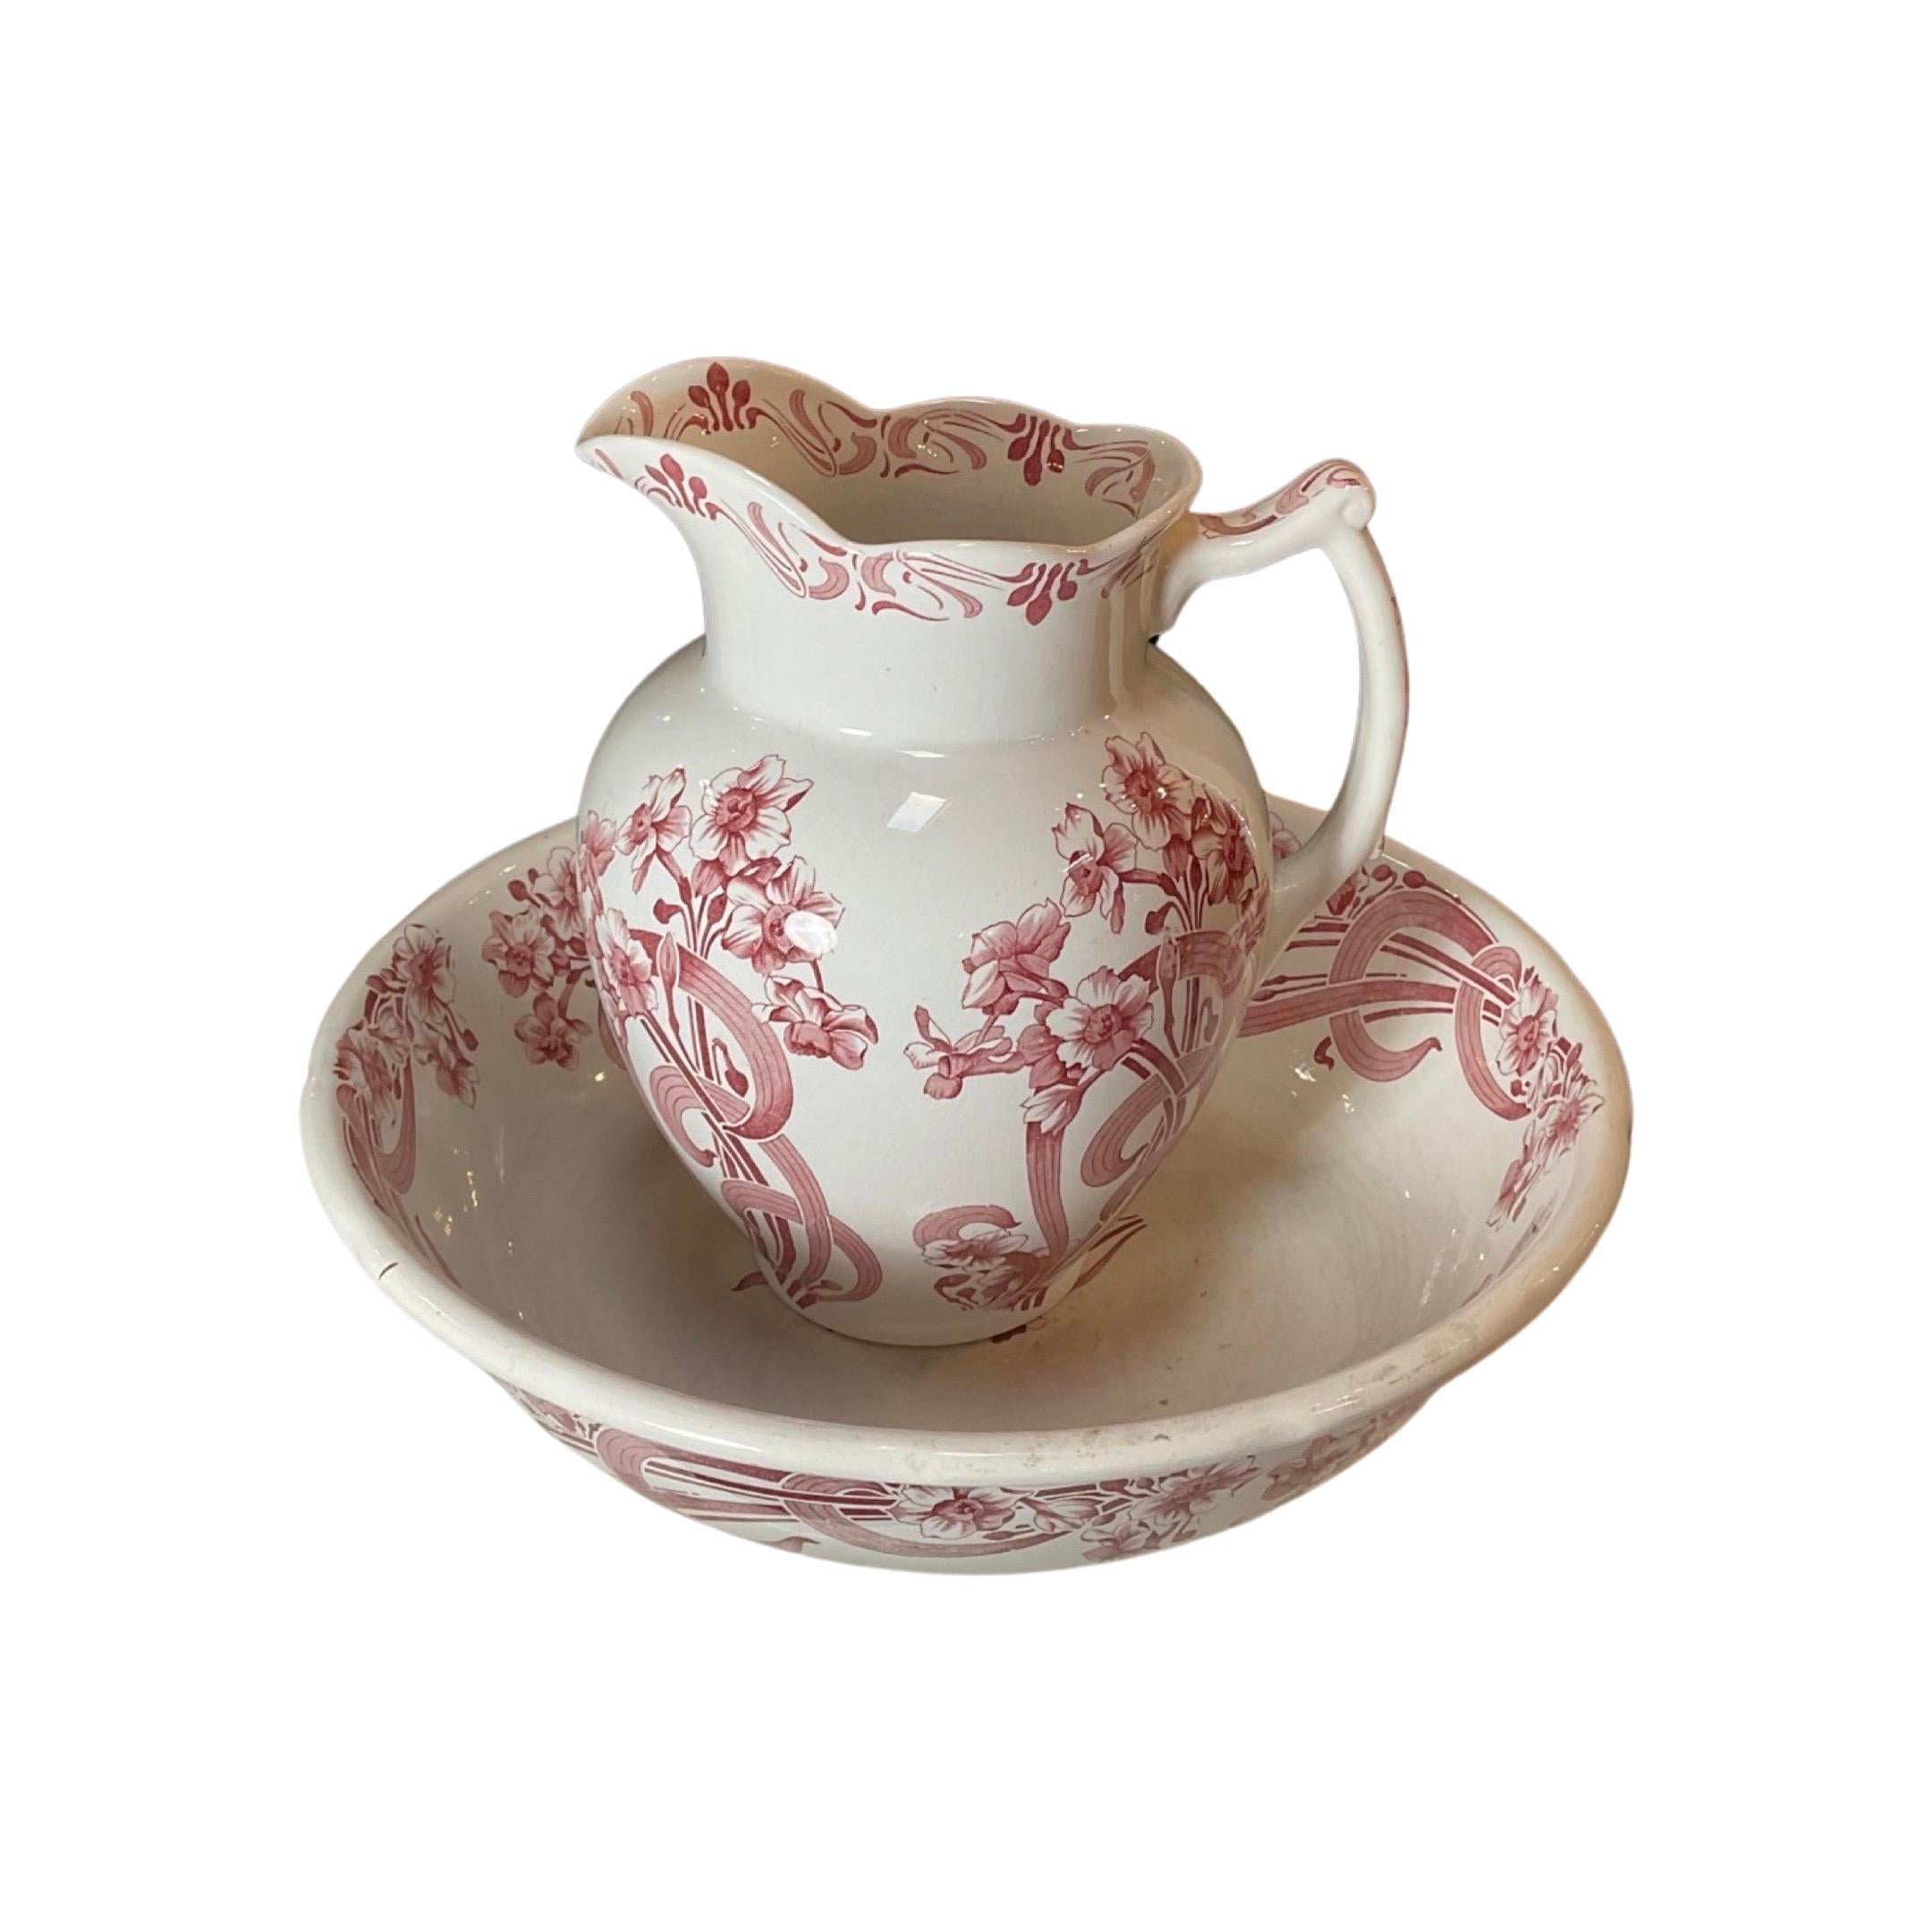 English Antique Porcelain Bowl and Pitcher In Good Condition For Sale In Dallas, TX